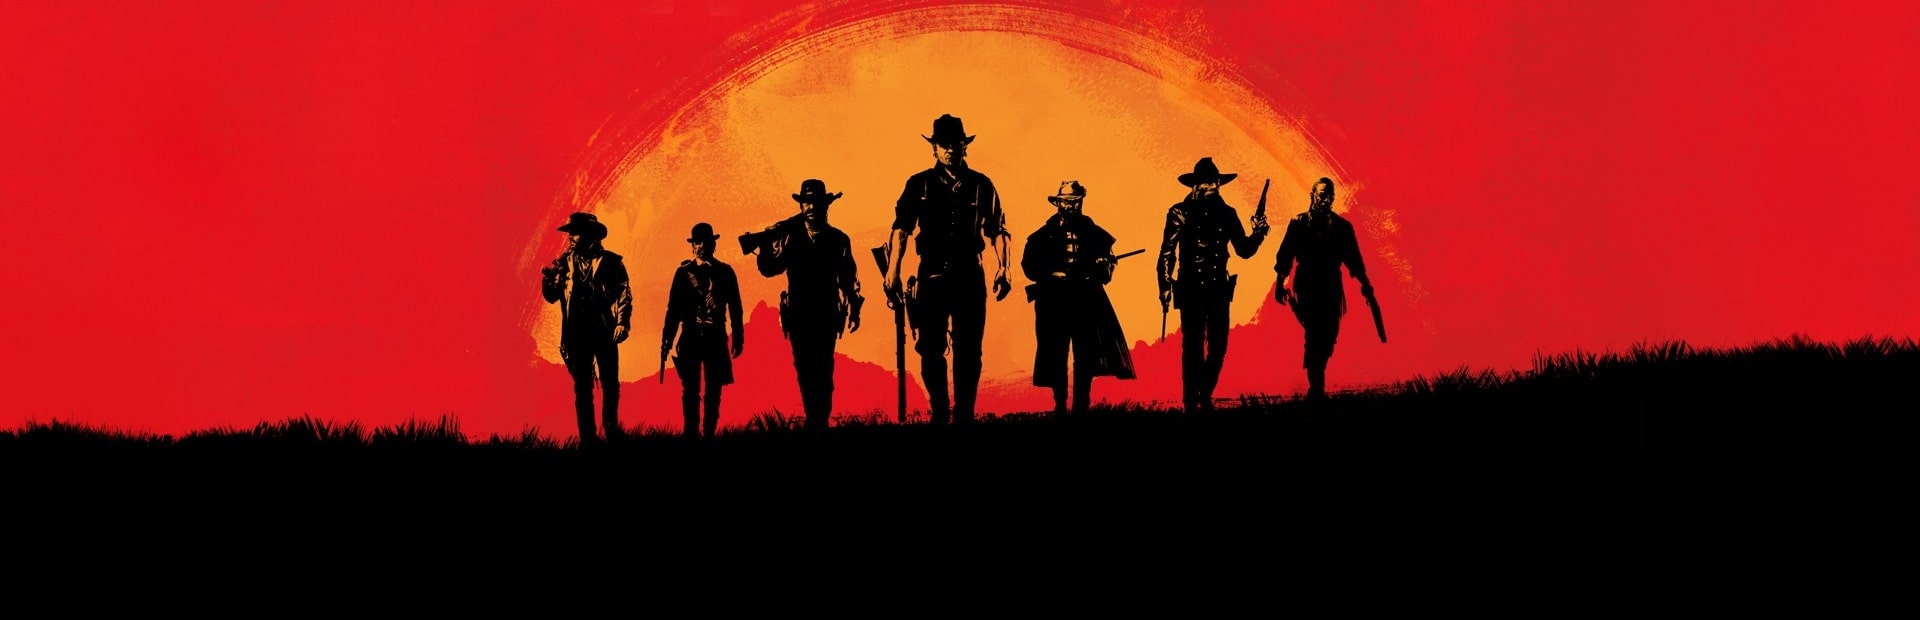 Red Dead Redemption 2 Review: A Wild Ride Worth Taking